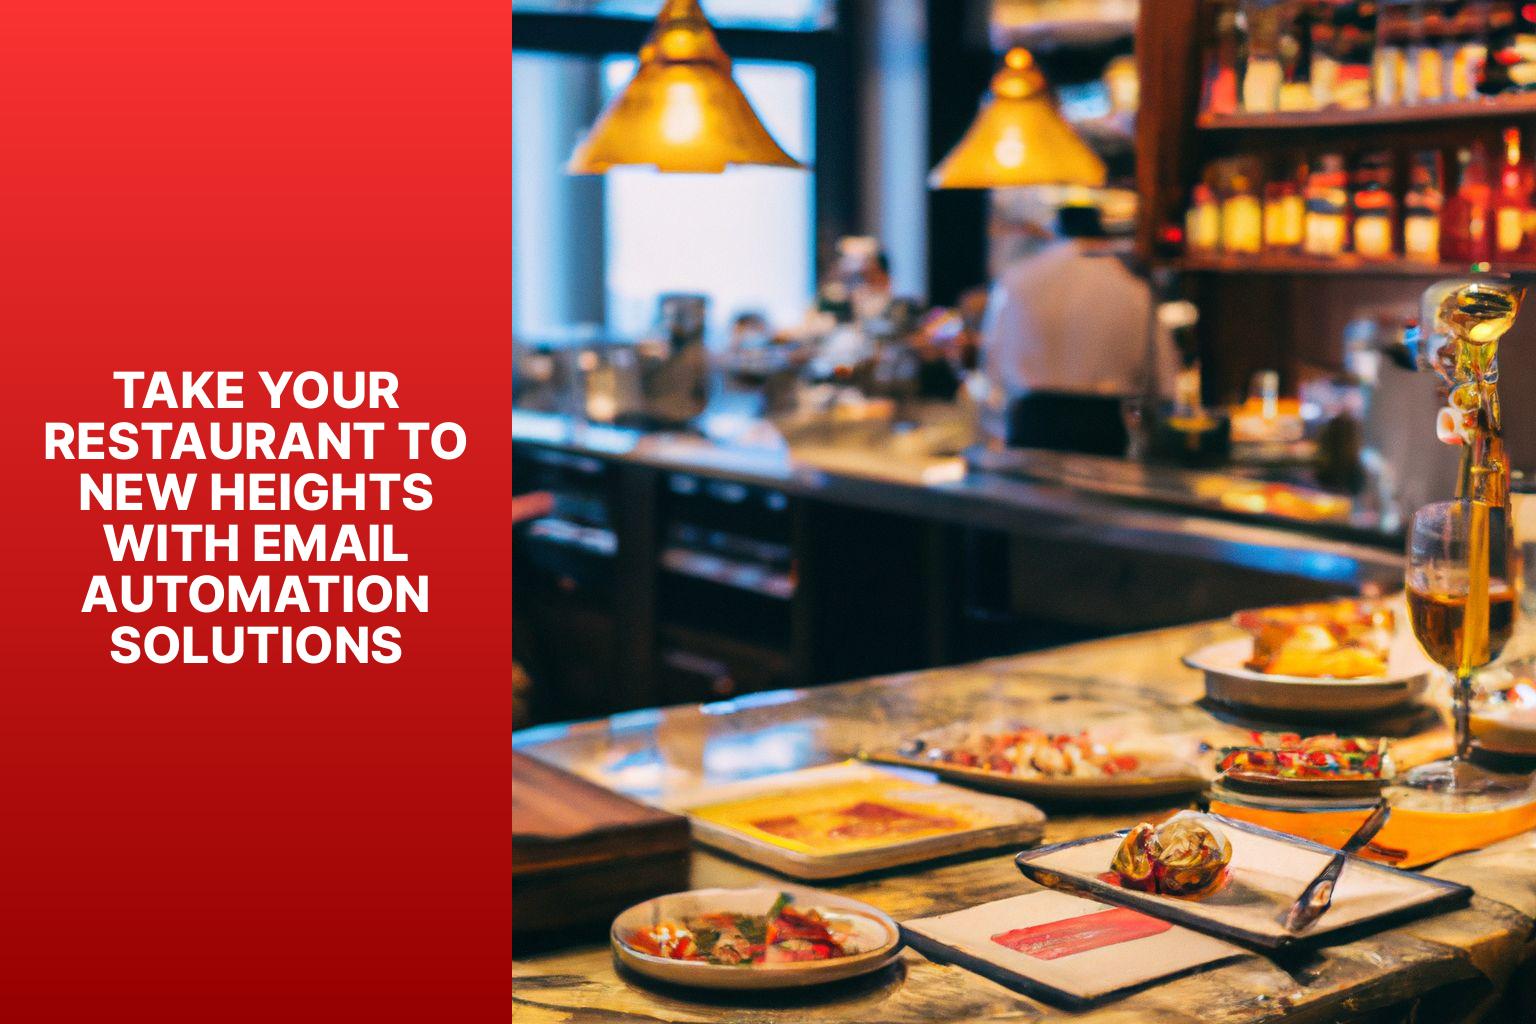 Take Your Restaurant to New Heights with Email Automation Solutions